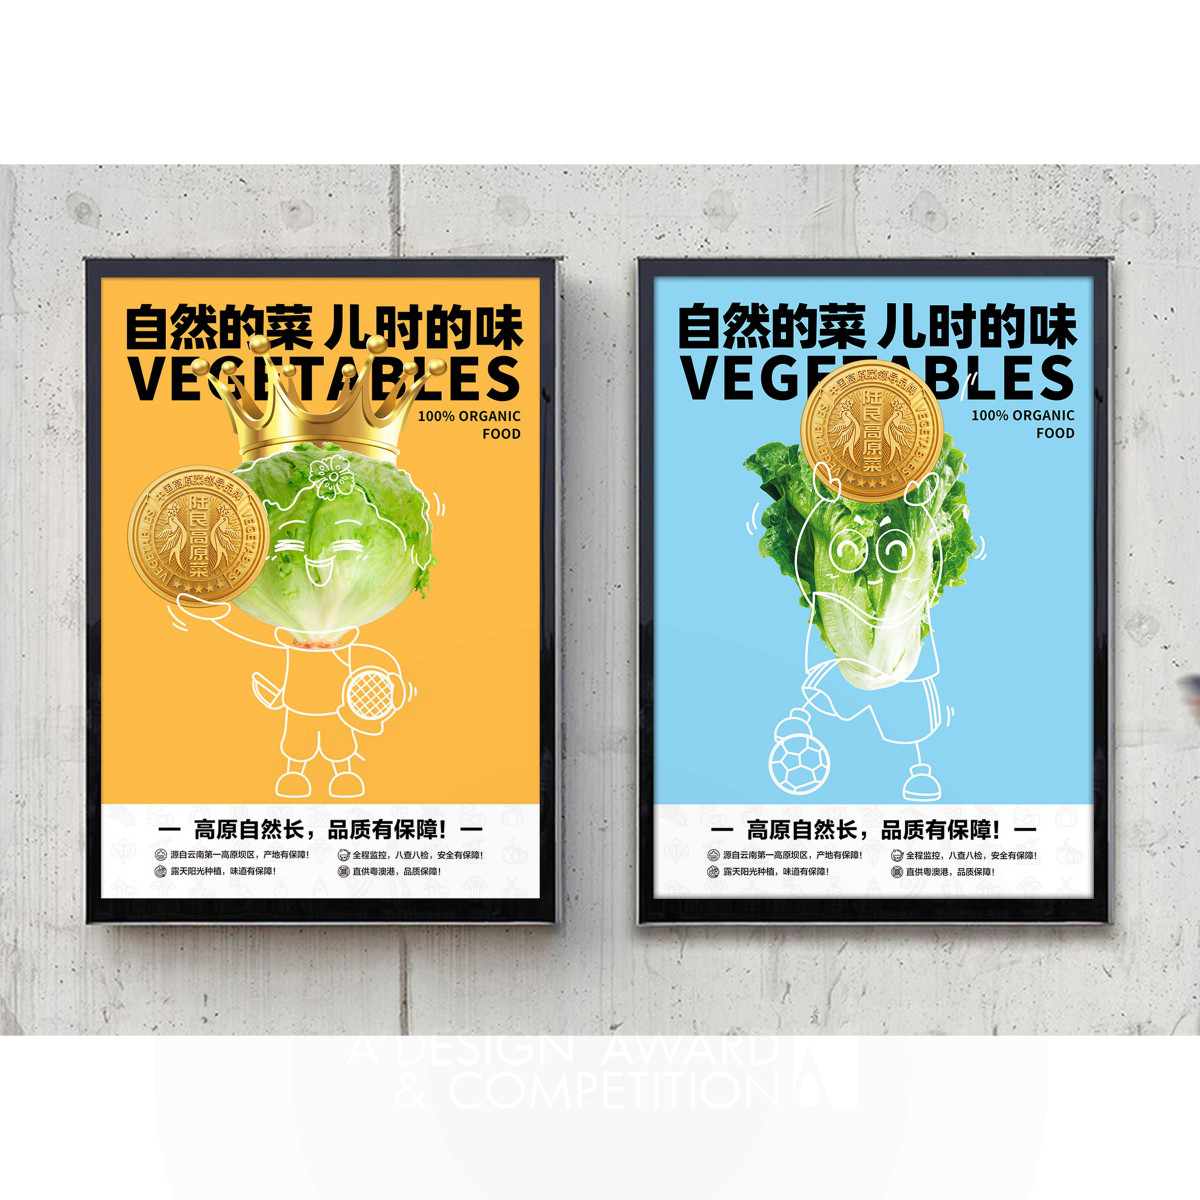 Xun Gao wins Iron at the prestigious A' Graphics, Illustration and Visual Communication Design Award with Luliang Highland Vegetables Brand Identity.